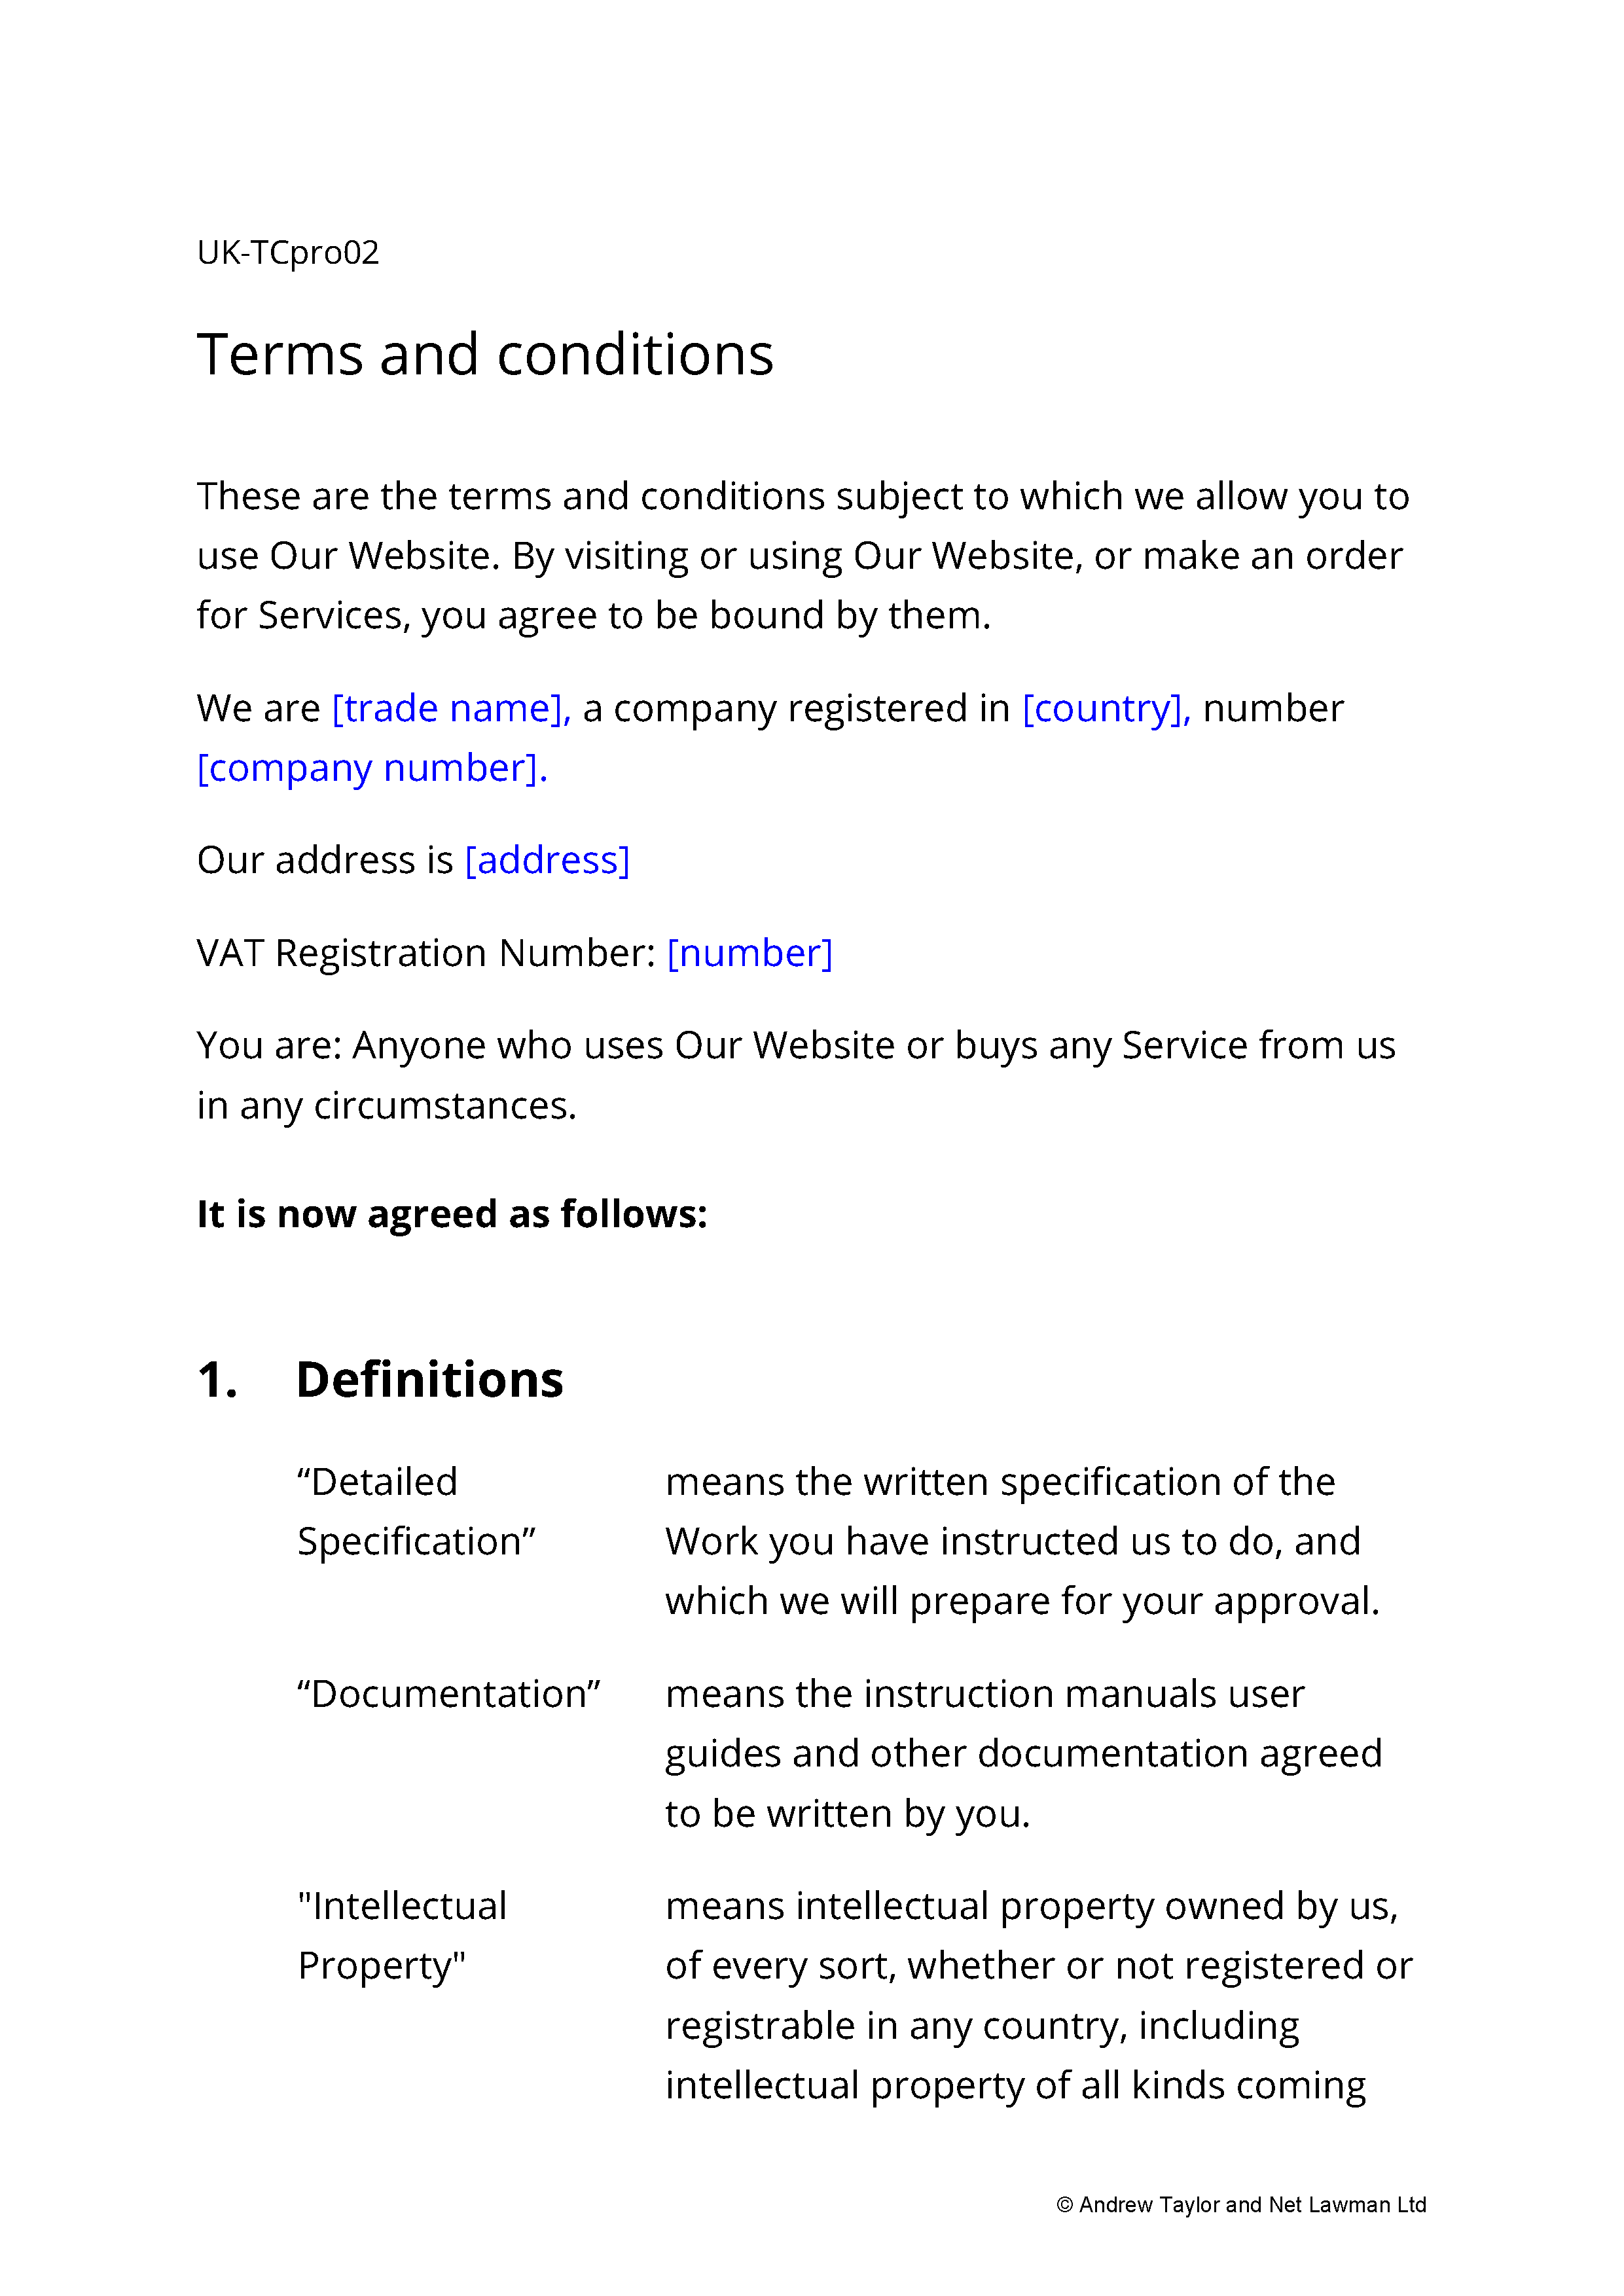 Sample page from the website terms for a consultancy business